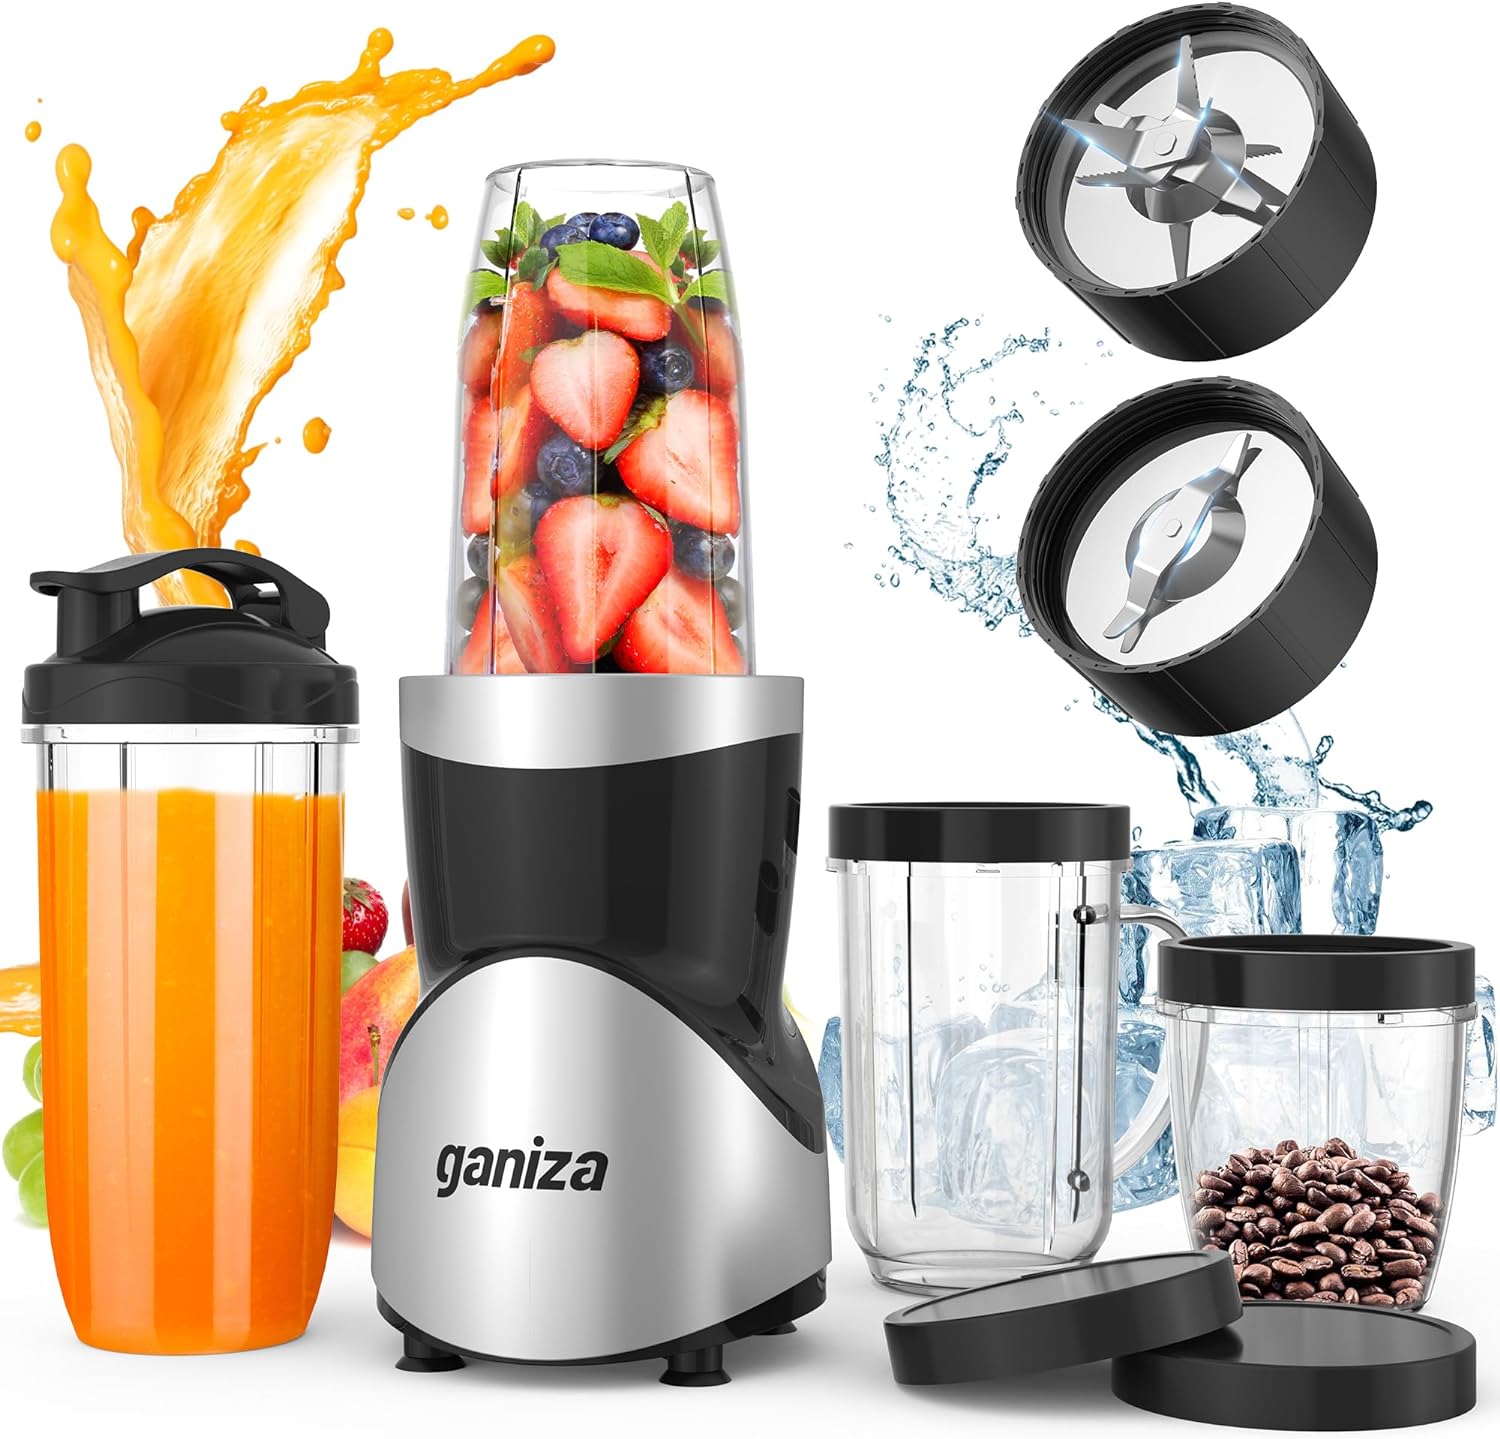 Discover Exciting Discounts on Ganiza Smoothie Blender! Limited Offer!